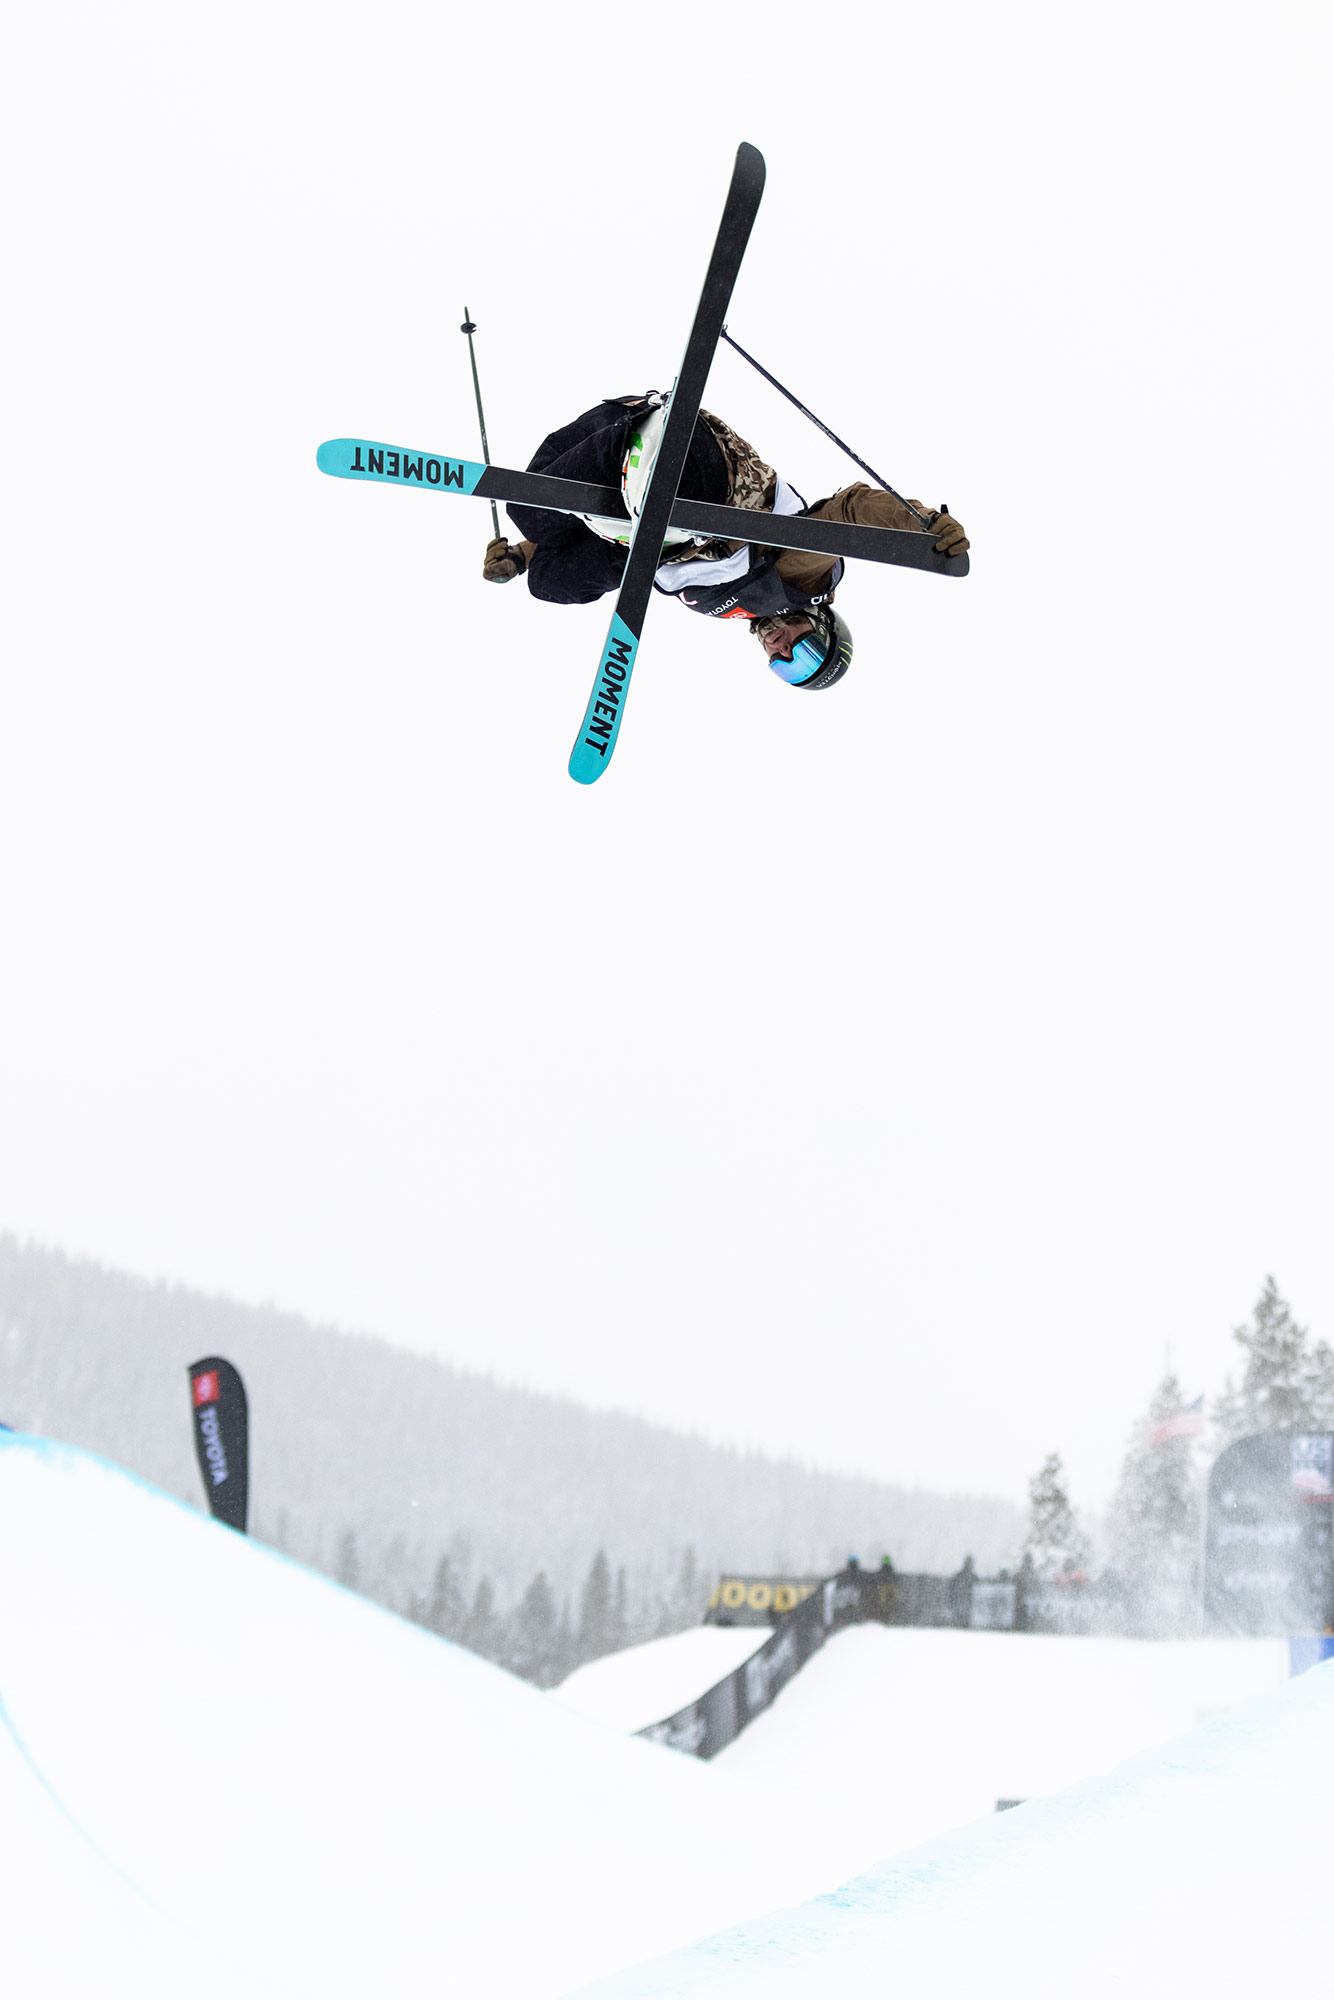 David Wise competes in halfpipe finals at the 2021 World Cup in Copper, Colorado